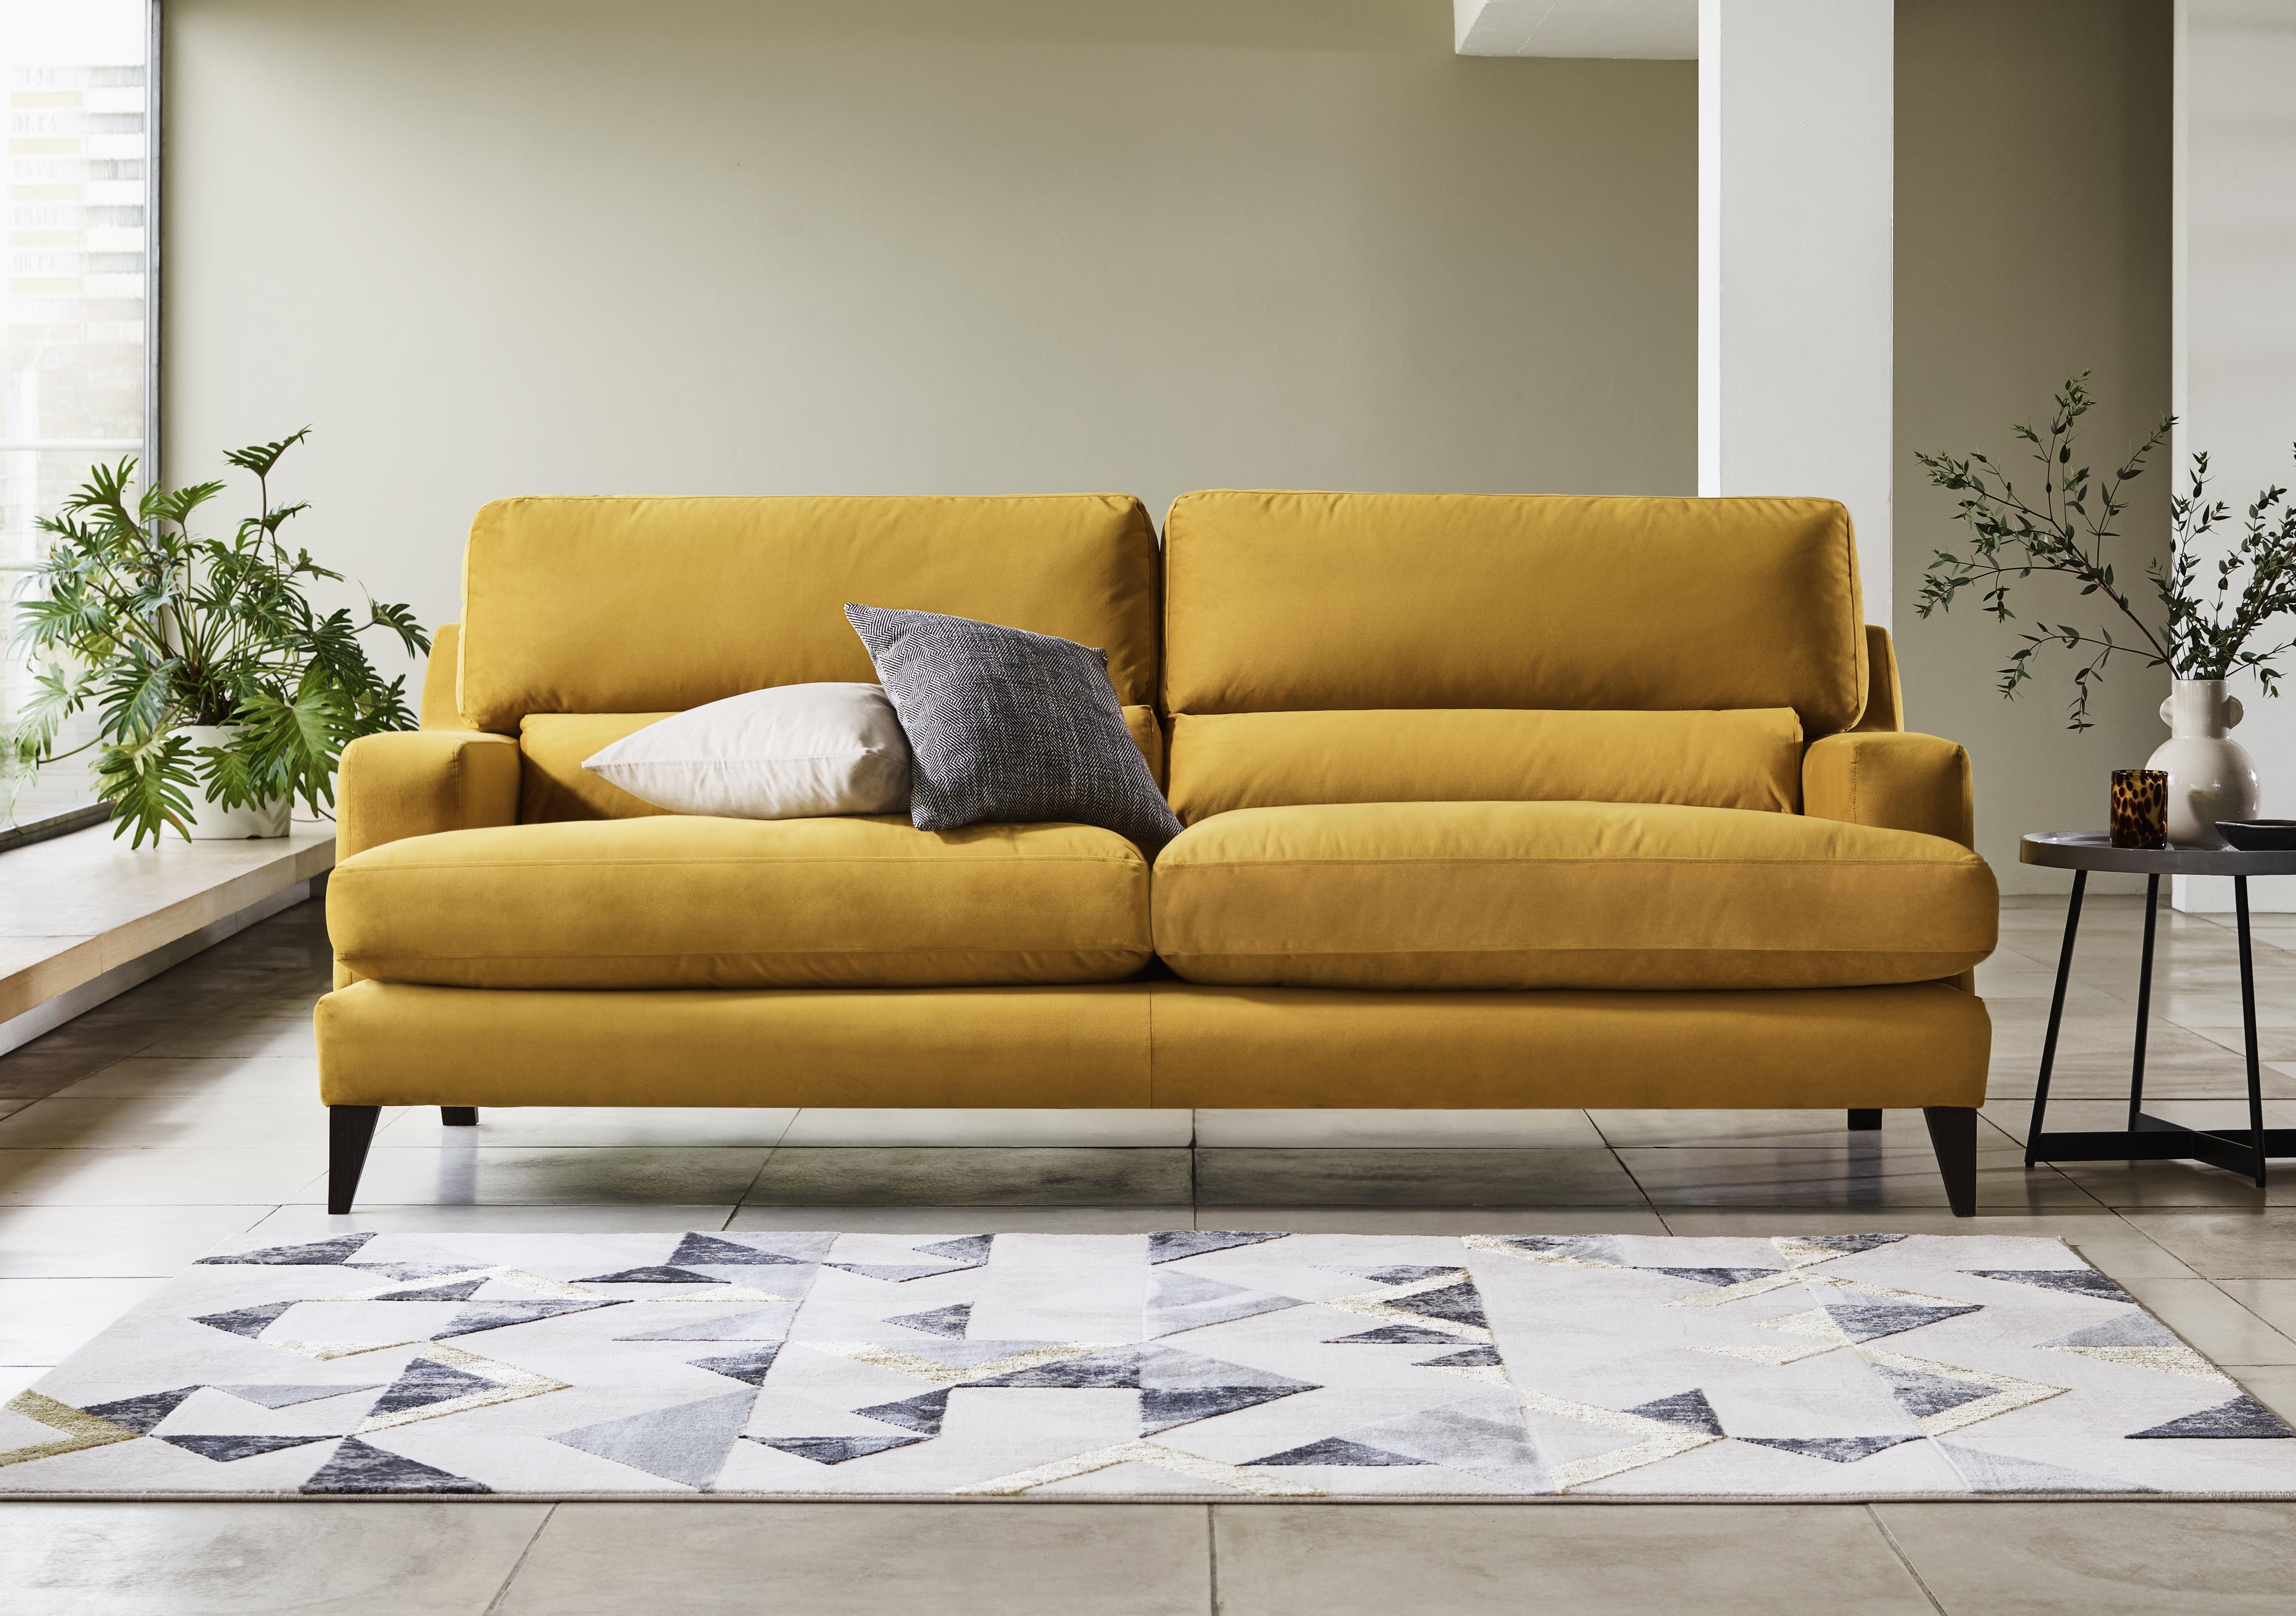 Romilly 3 Seater Fabric Sofa in  on Furniture Village